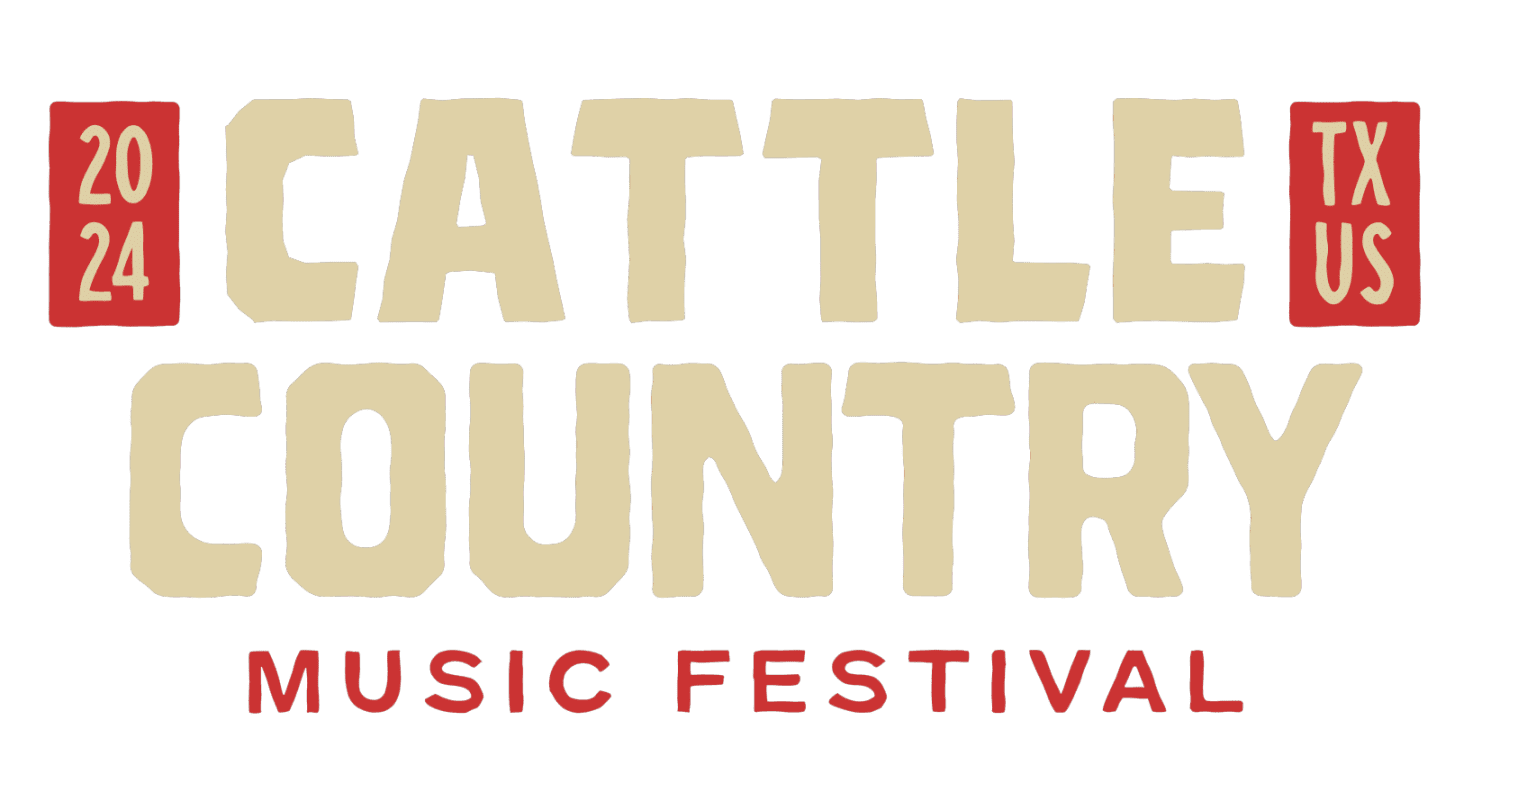 Tickets Cattle Country Music Festival